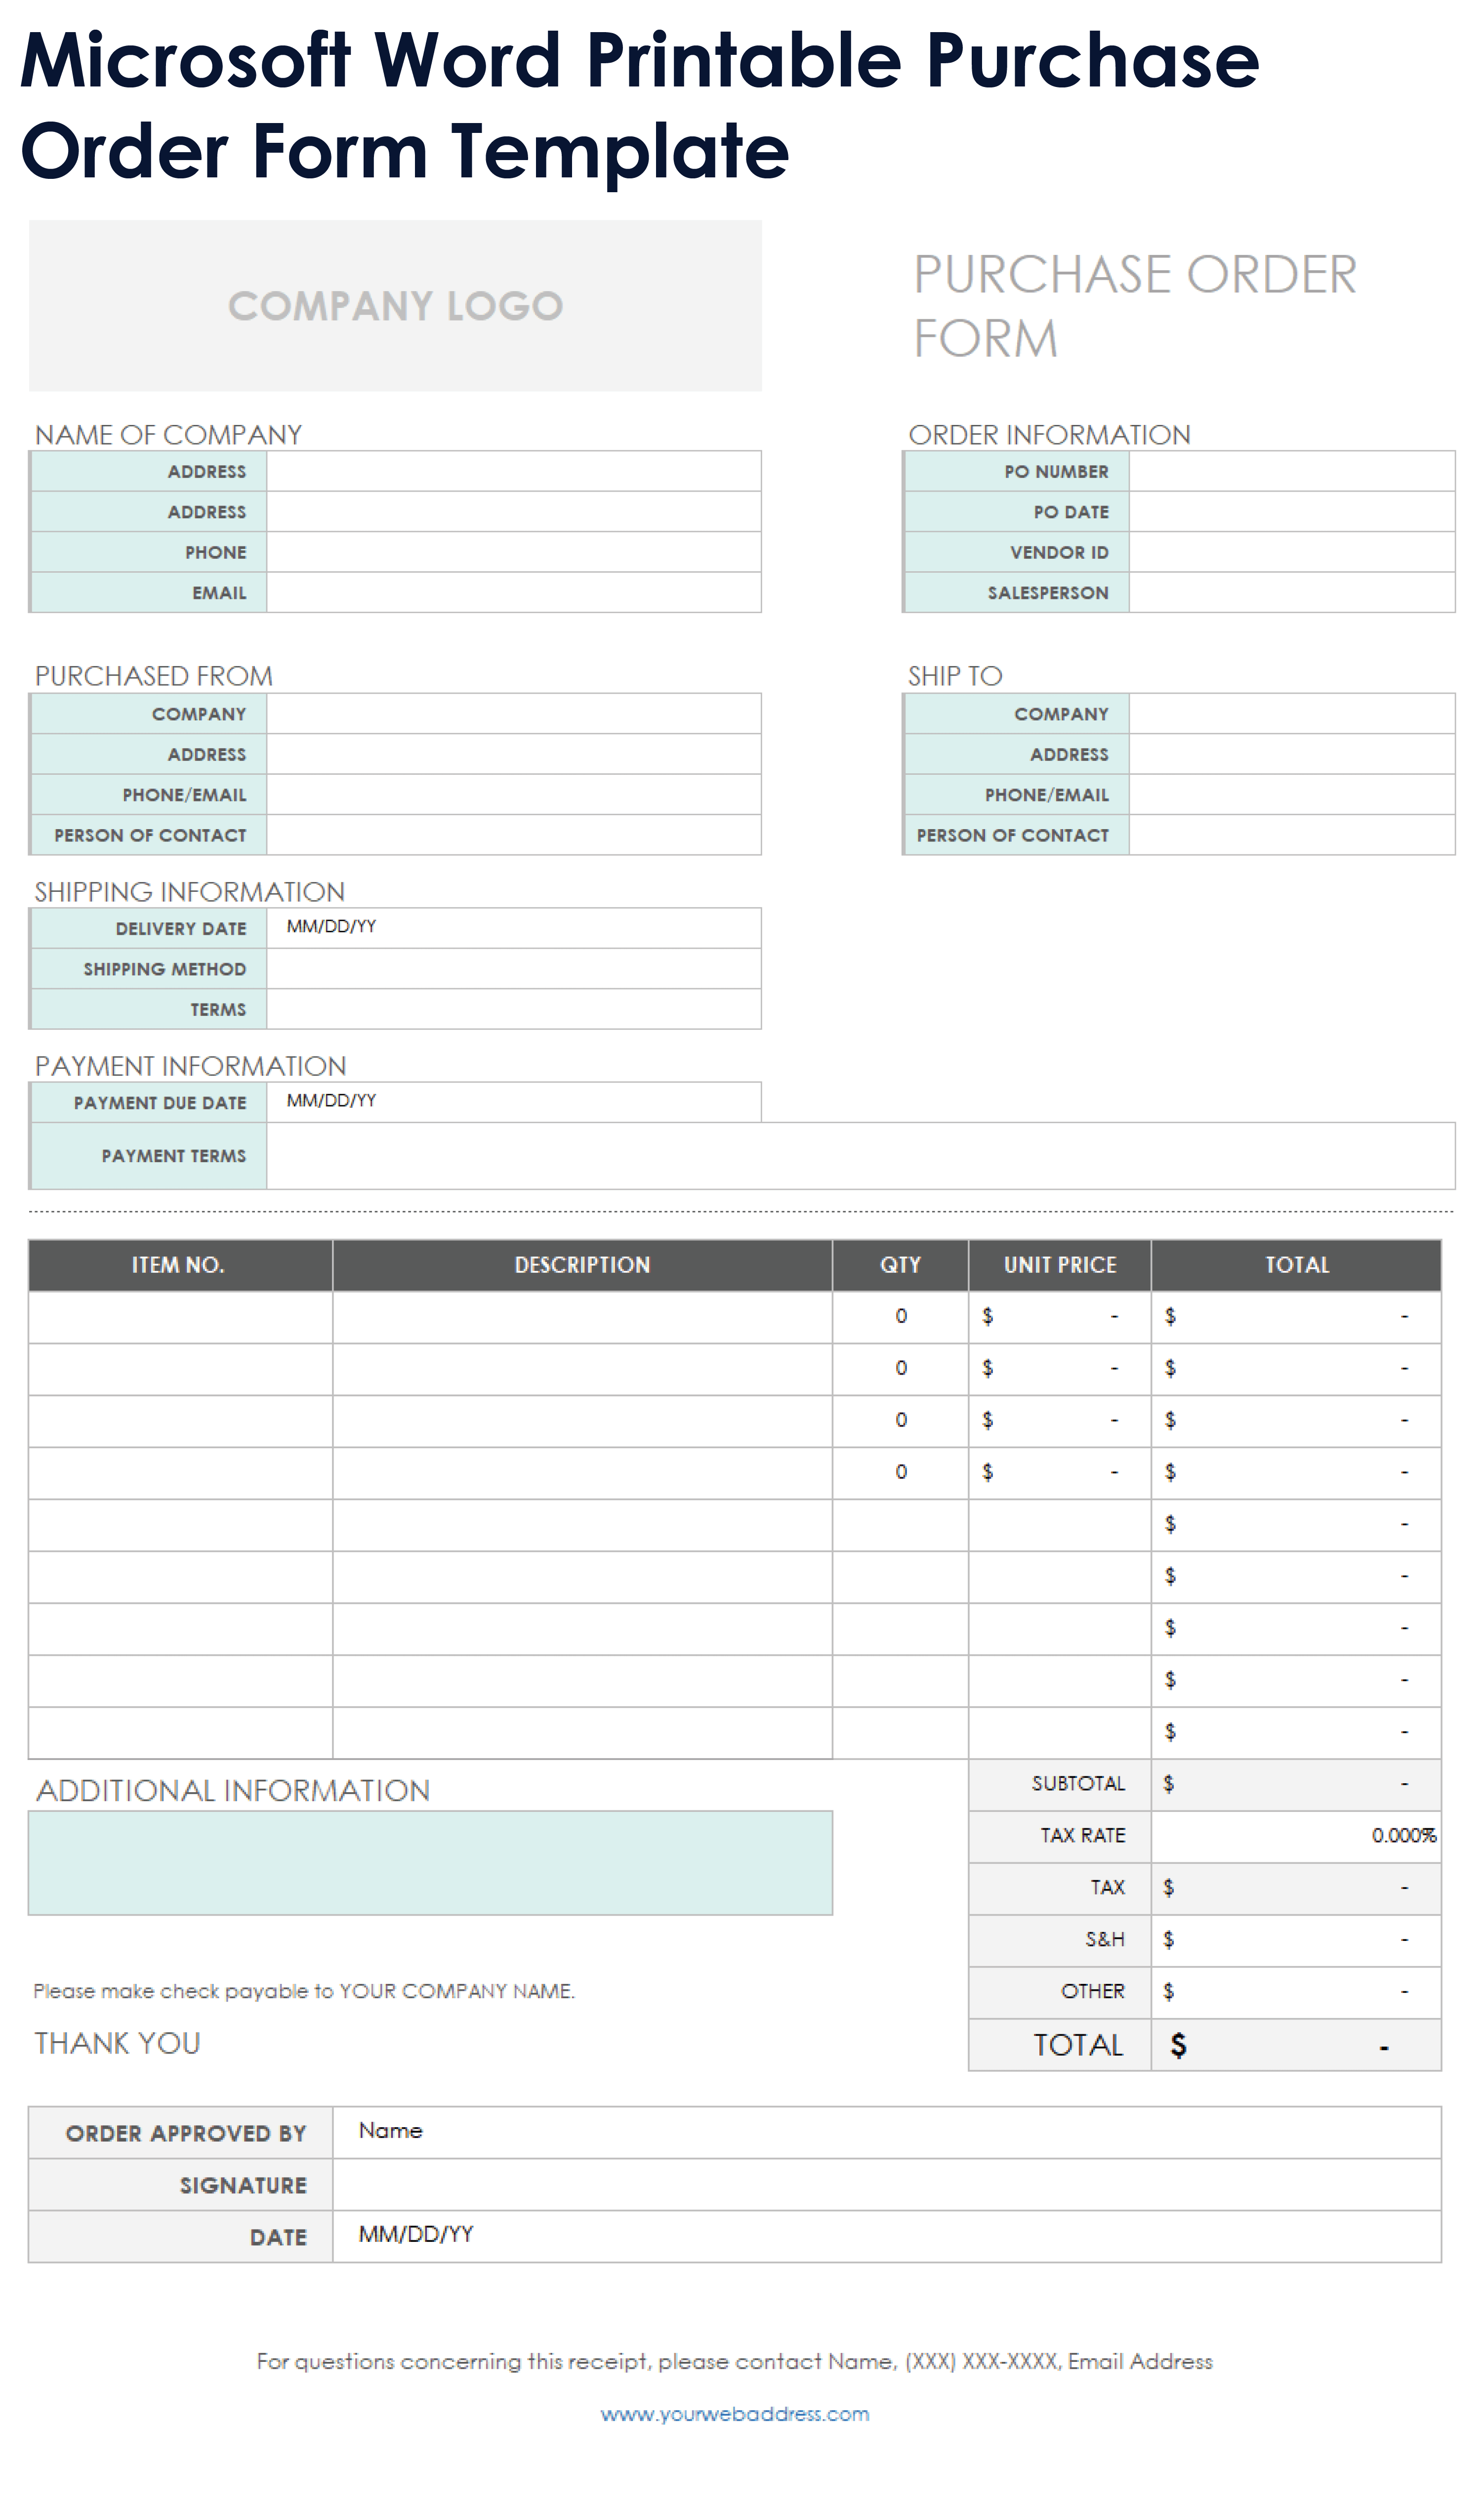 Microsoft Word Printable Purchase Order Form Template